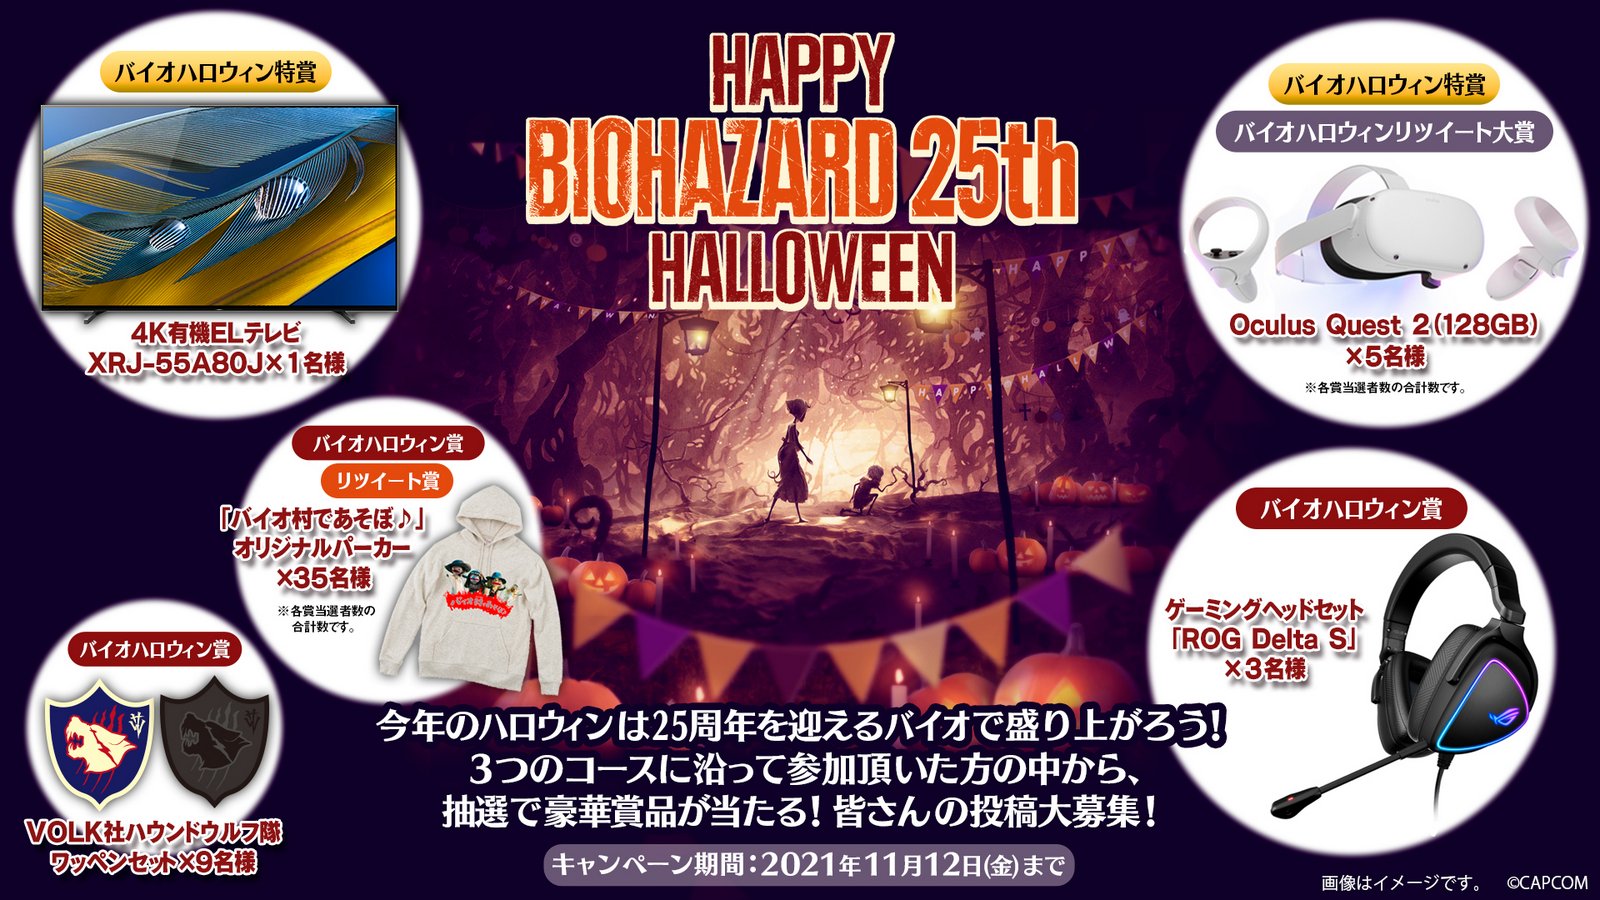 Capcom Celebrates 25th Anniversary of Resident Evil with Halloween Contents